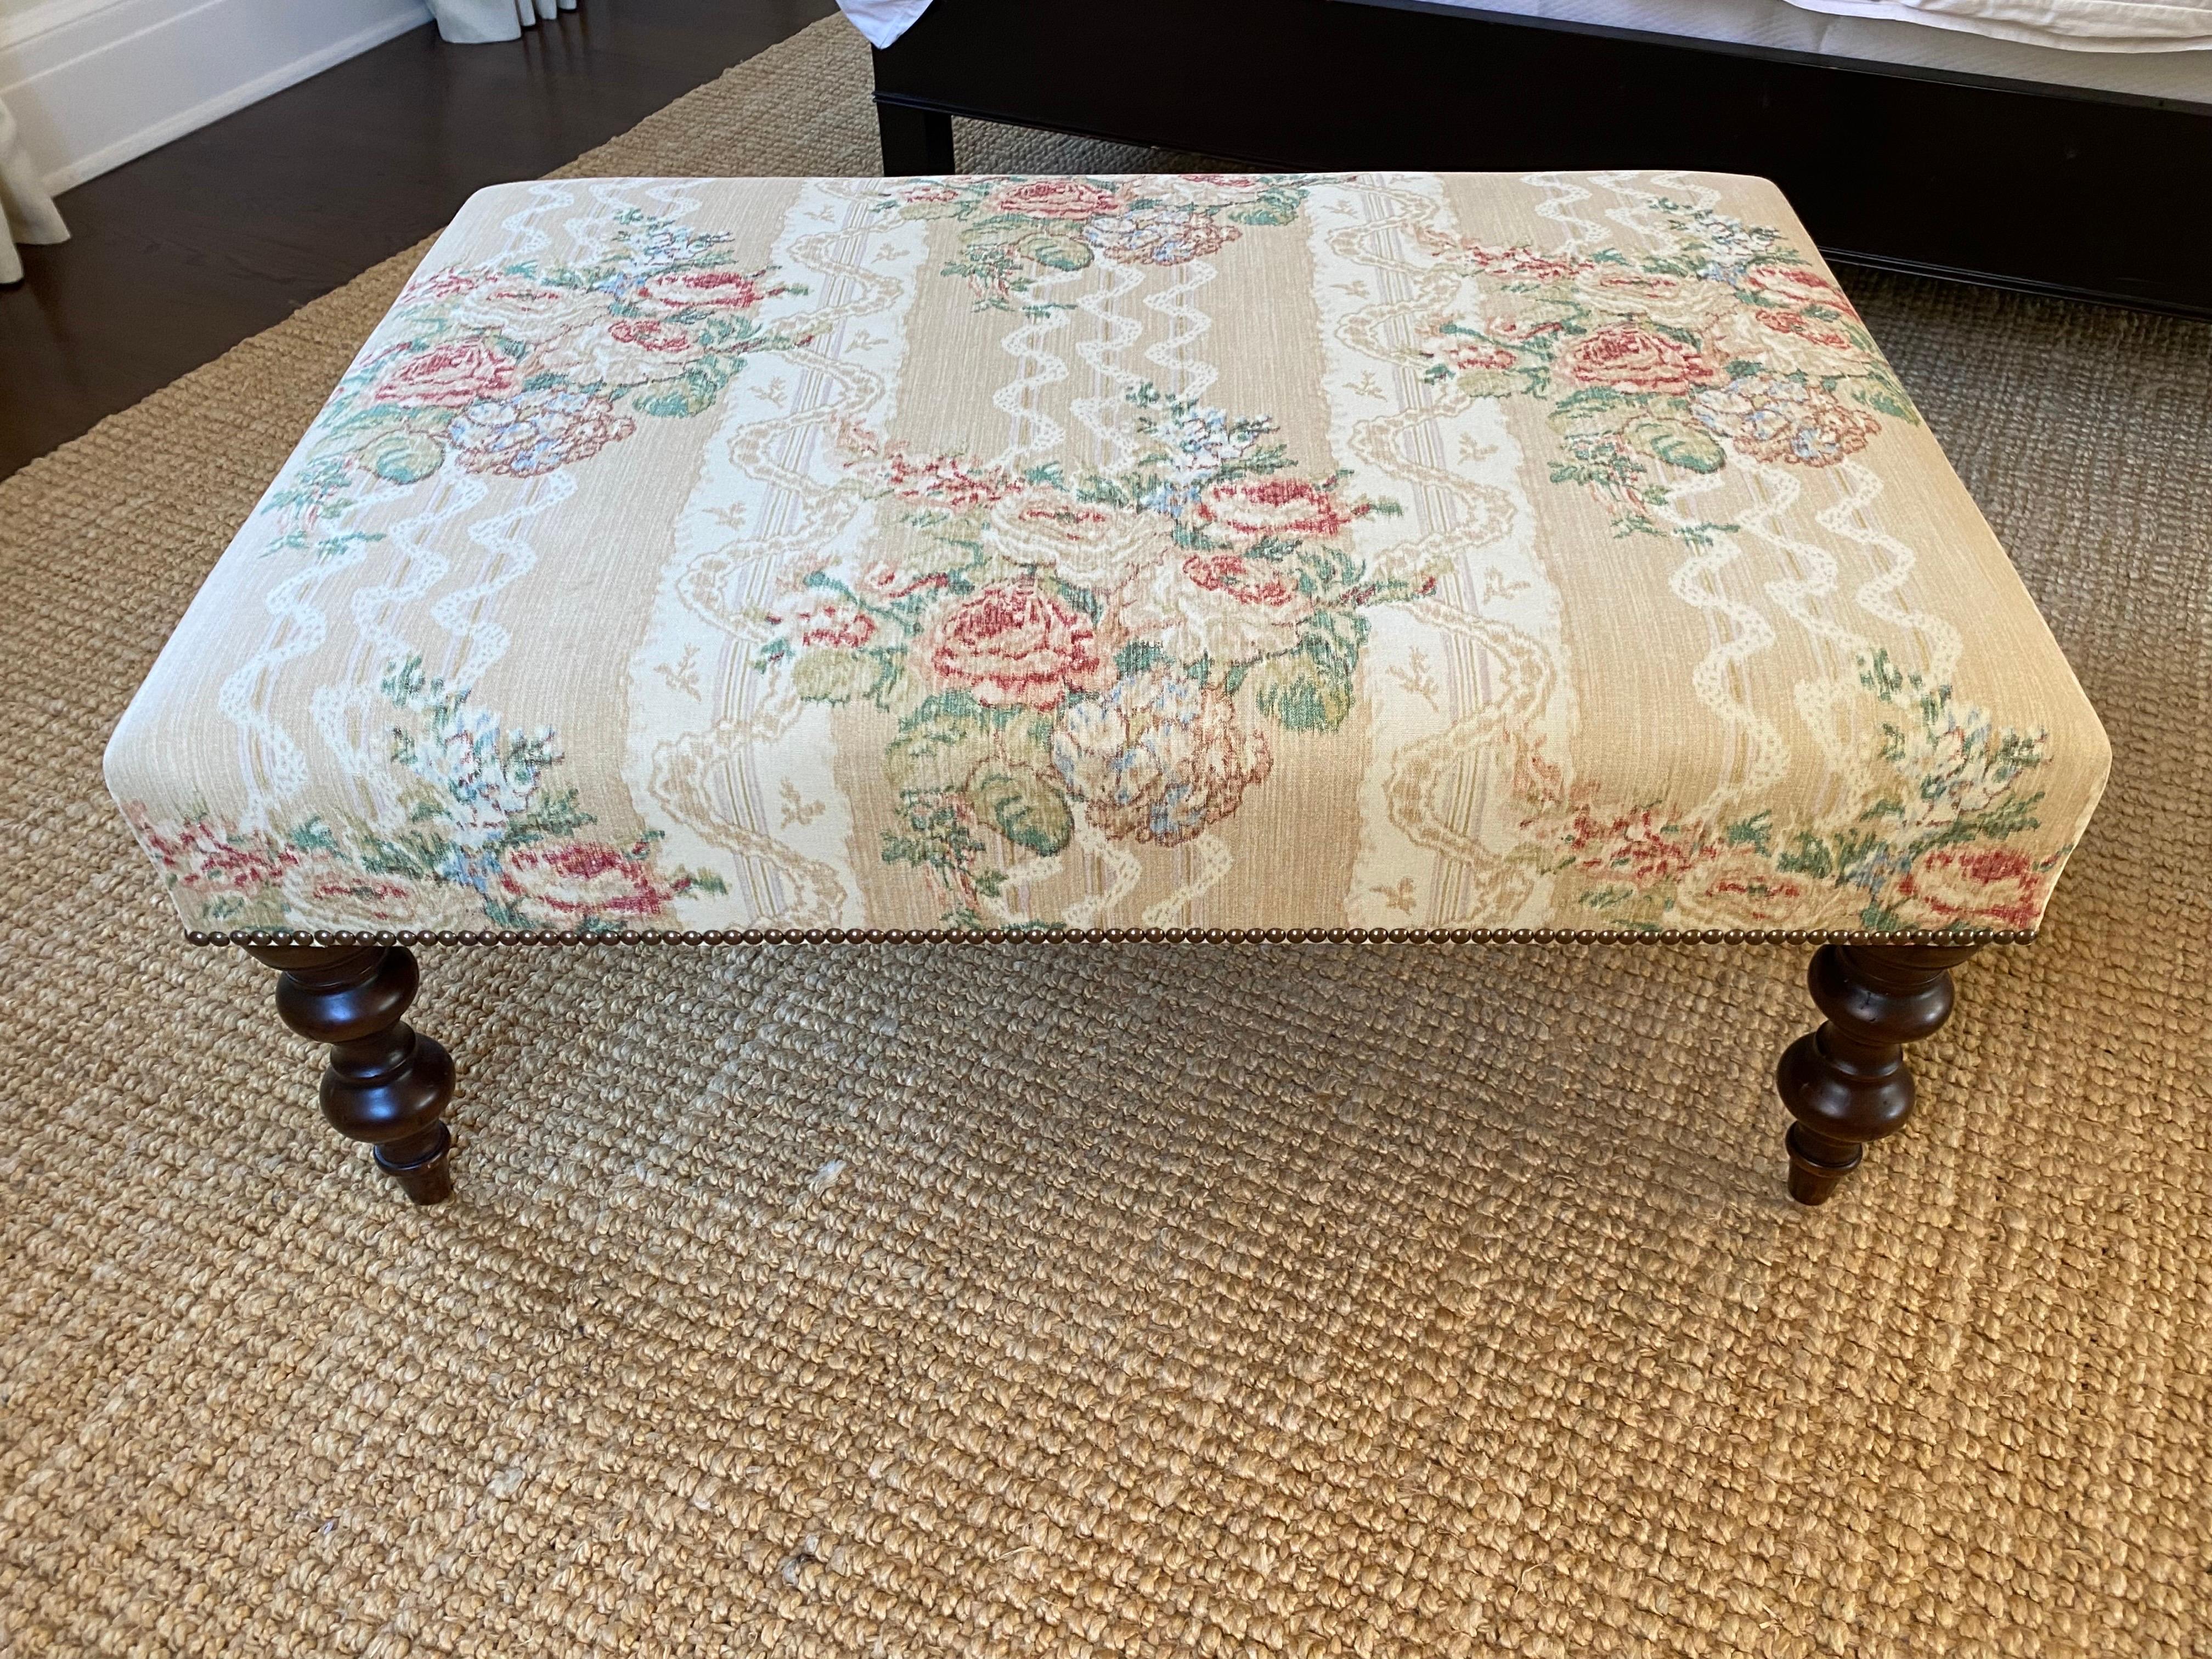 American Vintage Upholstered Ottoman in Floral Chintz Stripe with Slipcover